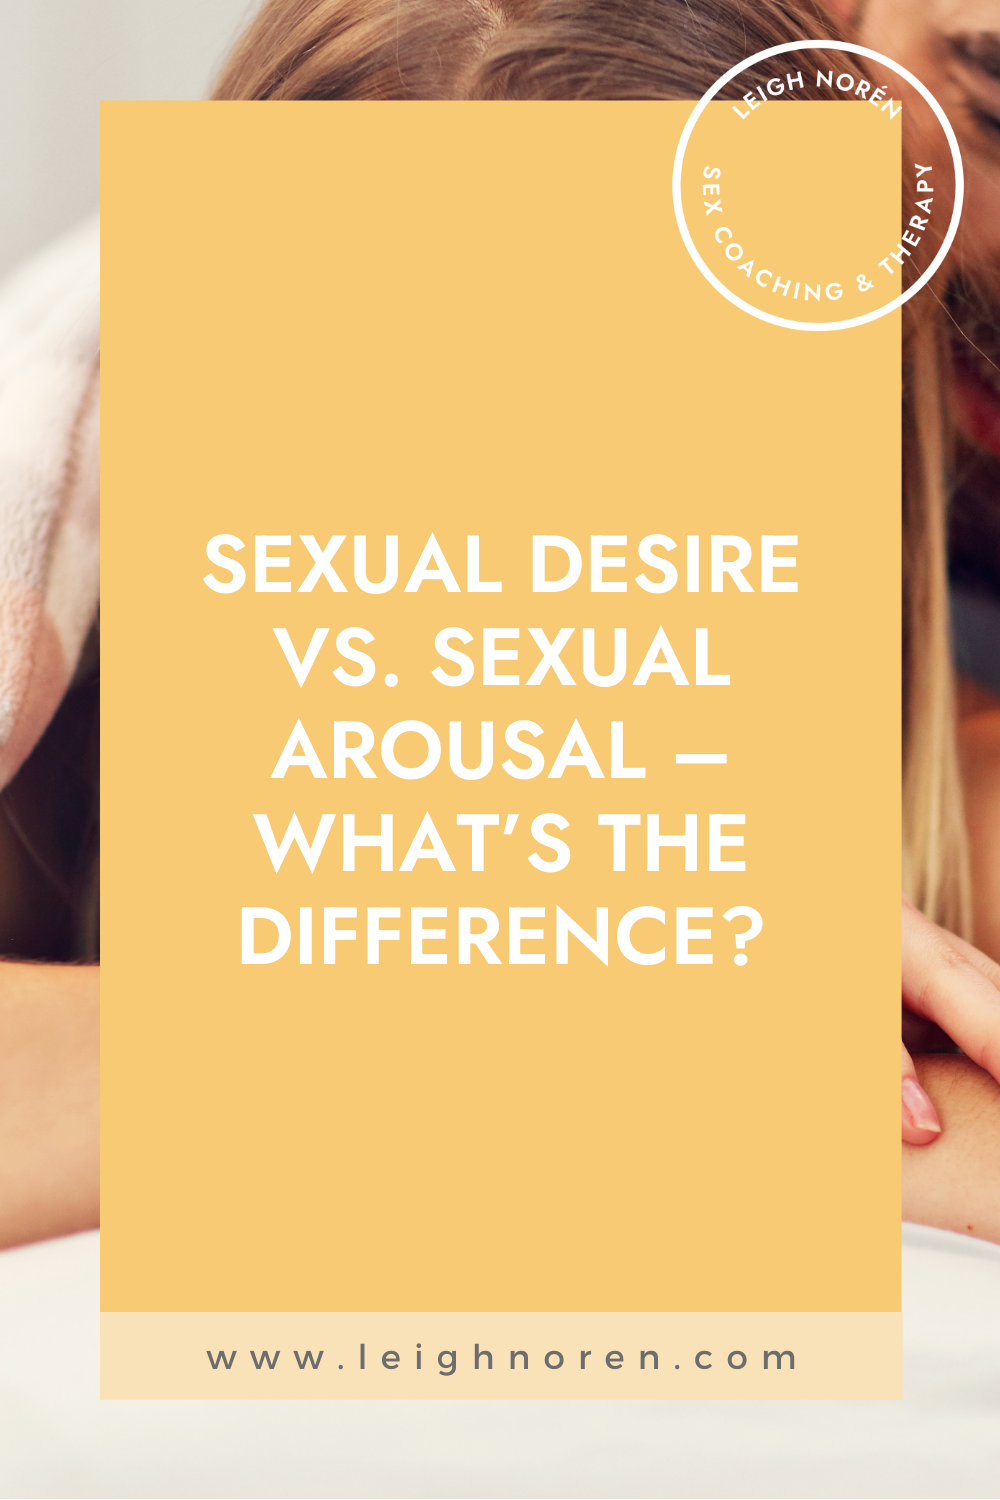 Sexual Desire Vs. Sexual Arousal - What's The Difference?